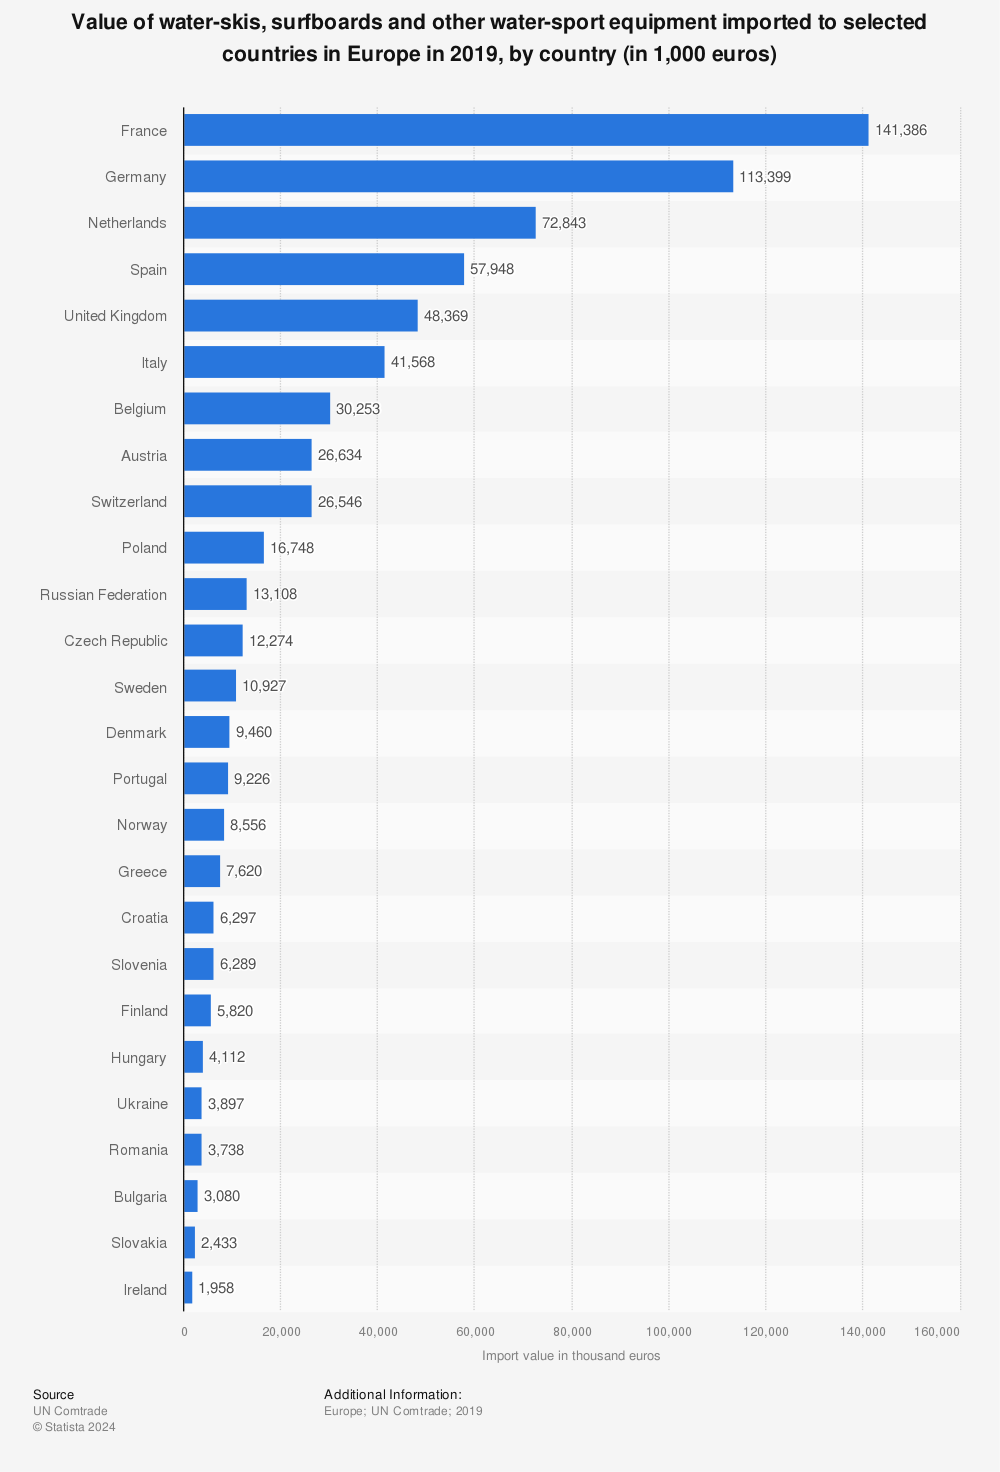 Statistic: Value of water-skis, surfboards and other water-sport equipment imported to selected countries in Europe in 2019, by country (in 1,000 euros) | Statista